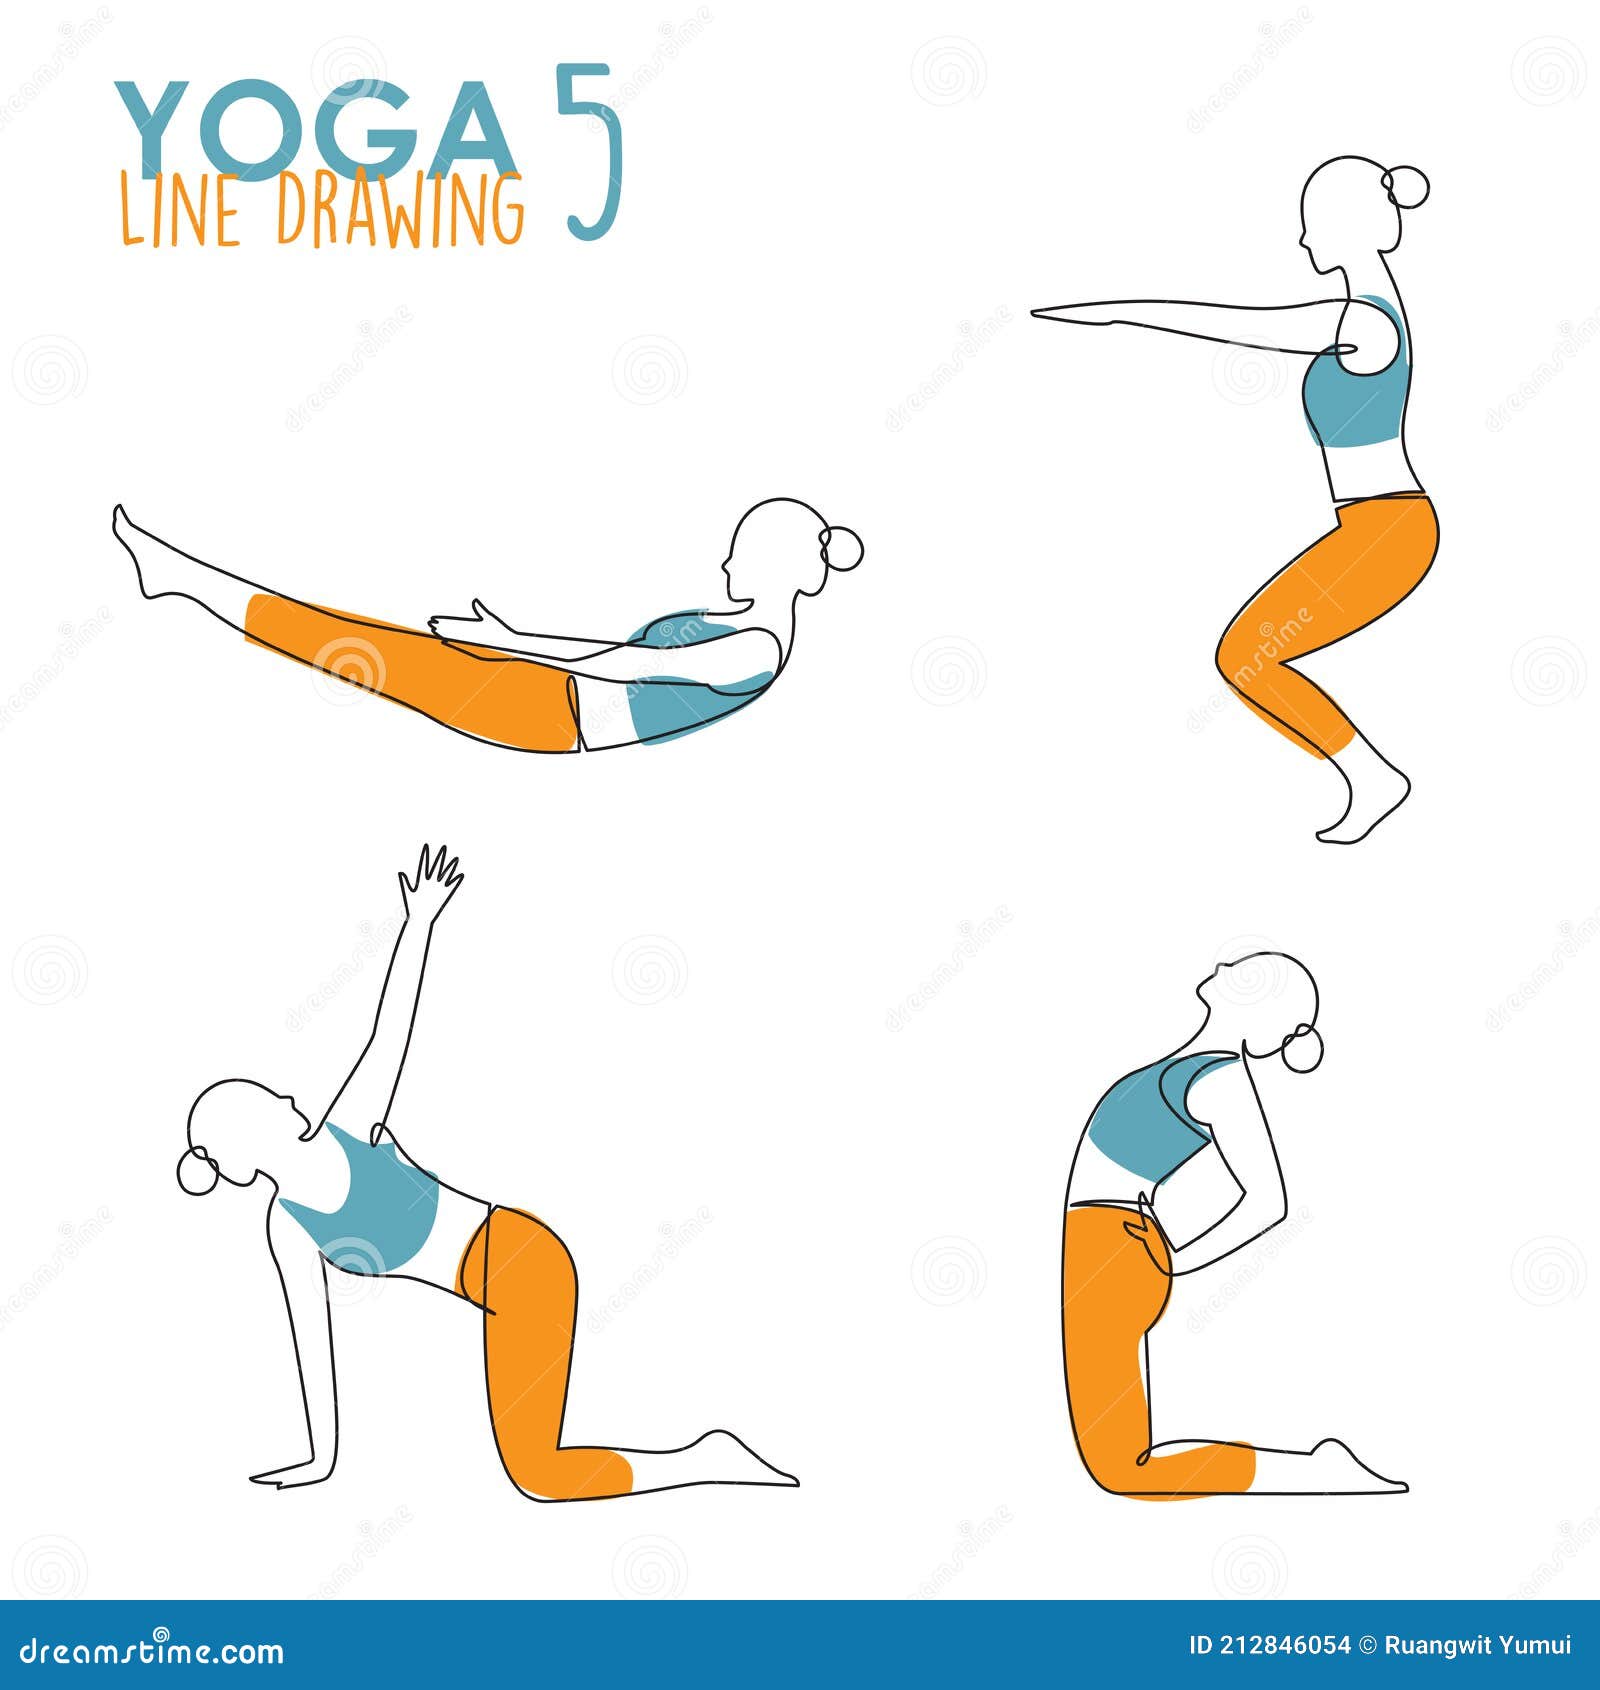 How to Perform Yoga (with Pictures) - wikiHow